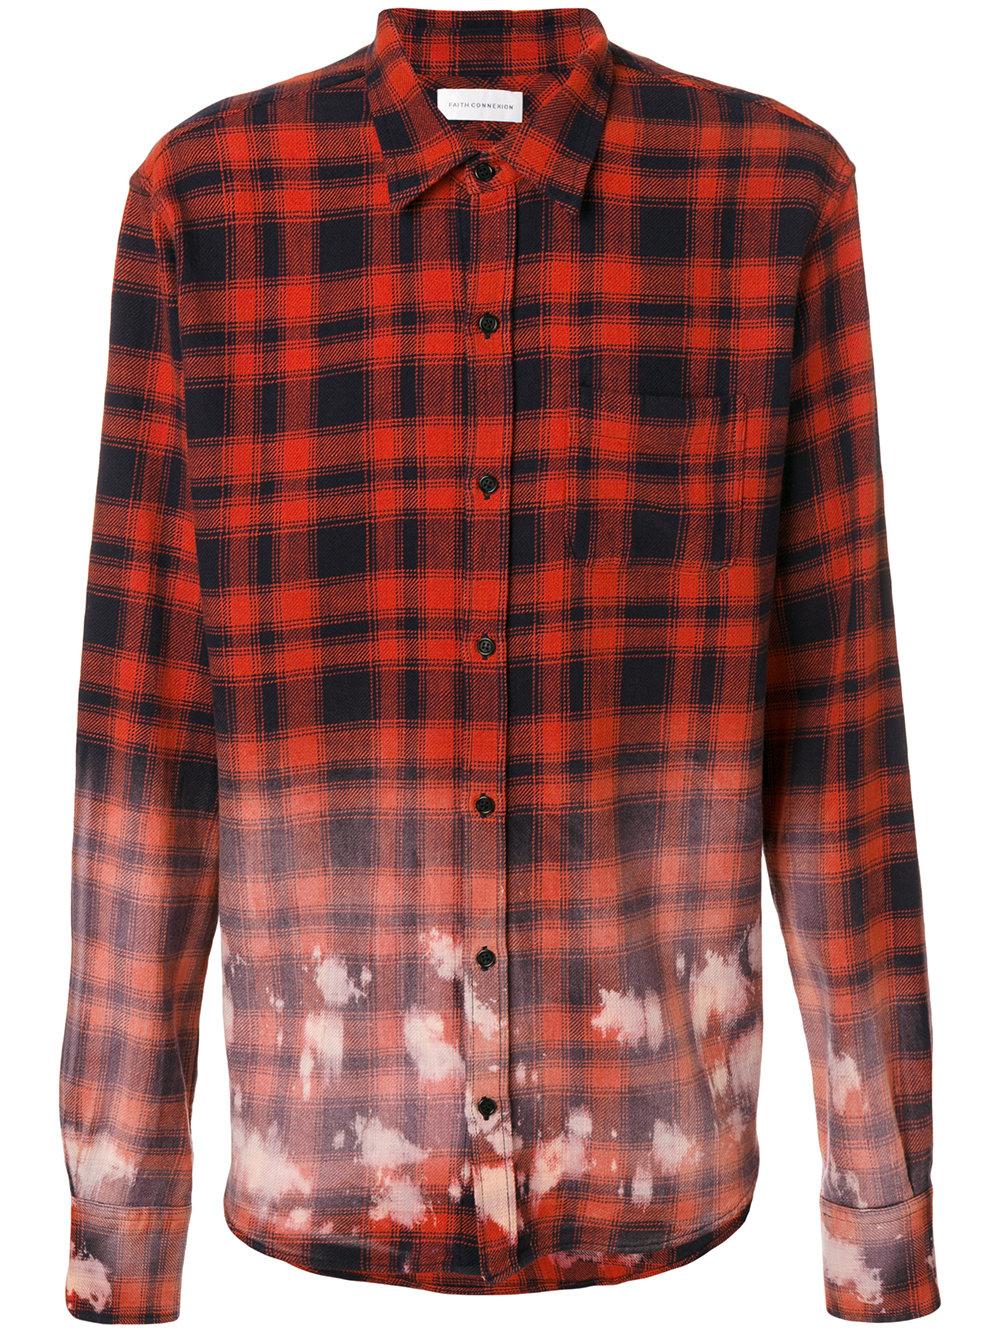 Lyst - Faith Connexion Oversized Tartan Shirt in Red for Men - Save 54%